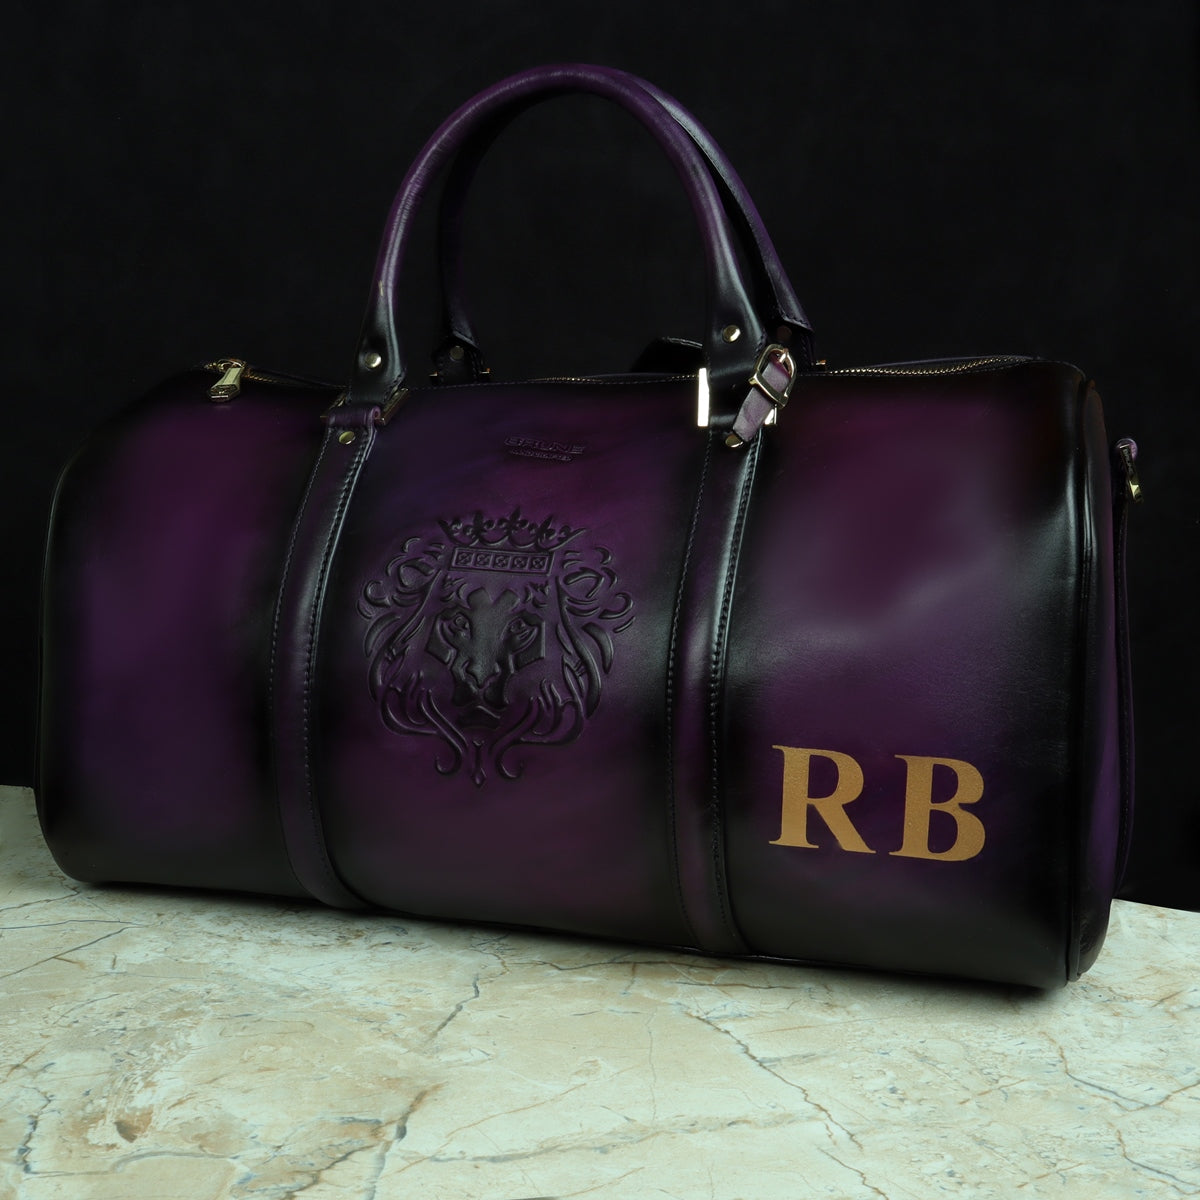 Customized "RB" Hand-Paint  Initial Purple Leather Duffle Bag with by Brune & Bareskin